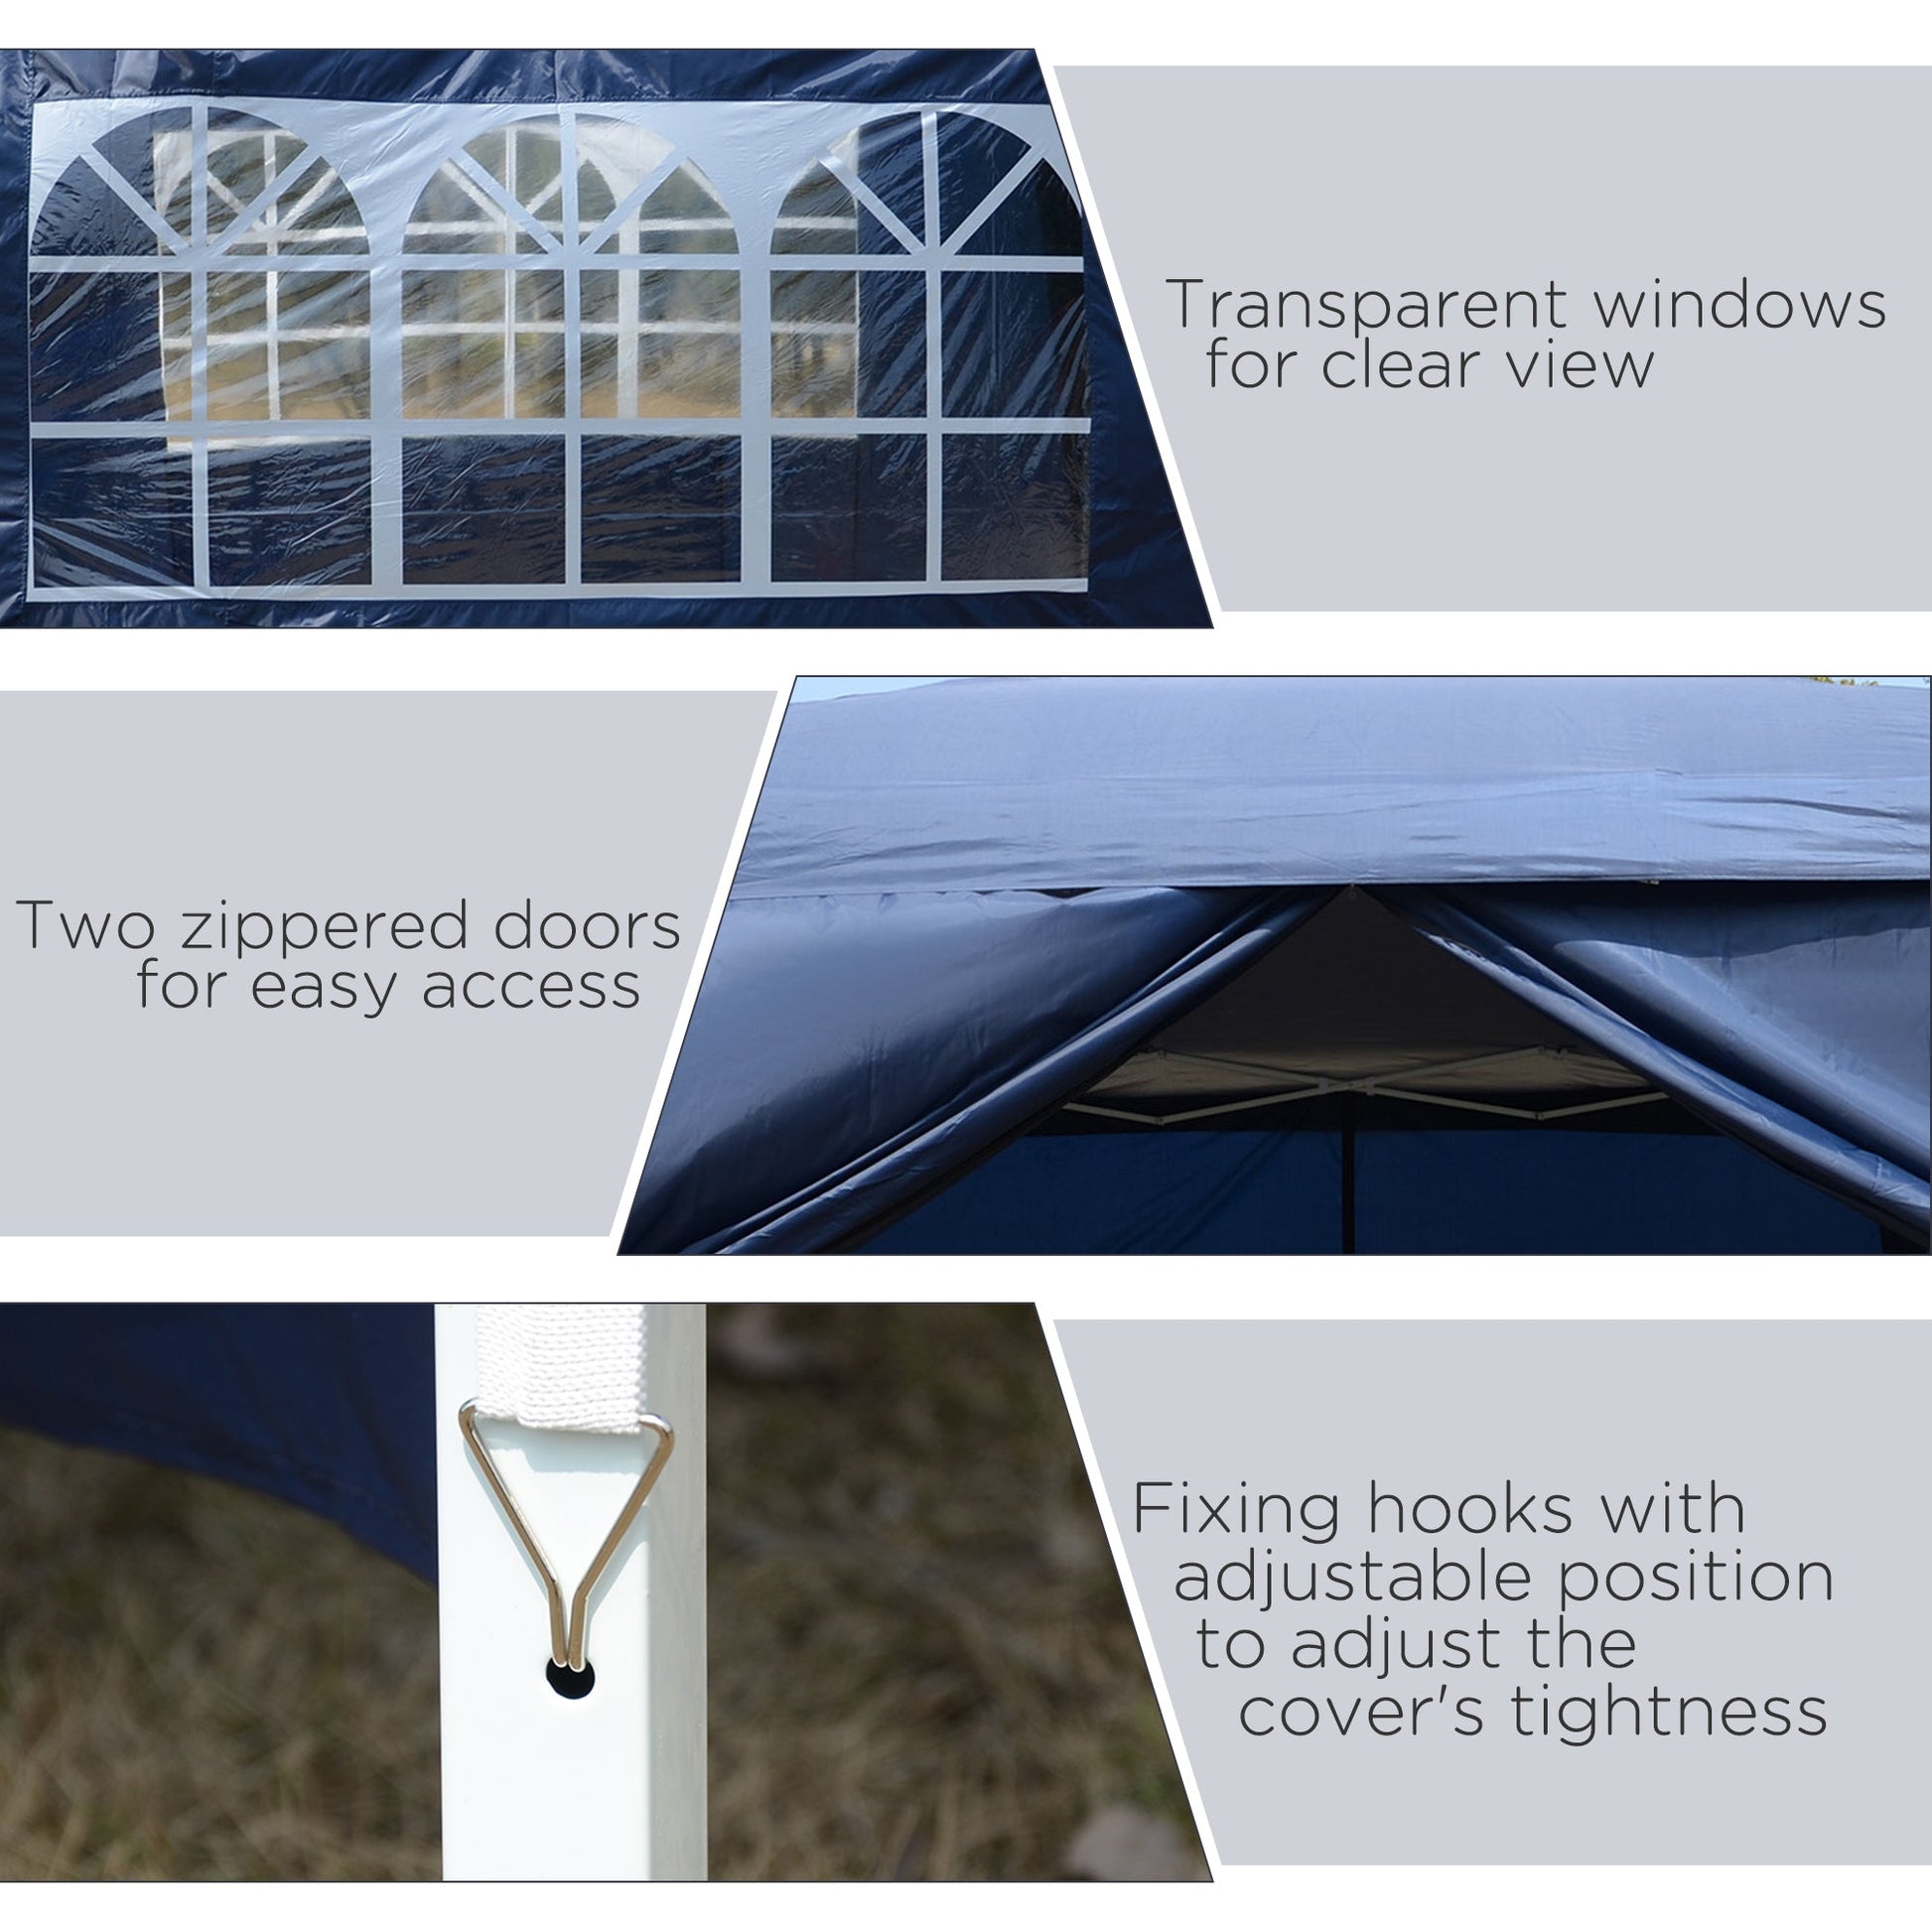 10'x10' Outdoor Pop Up Party Tent Wedding Gazebo Canopy with Carrying Bag (Blue) at Gallery Canada